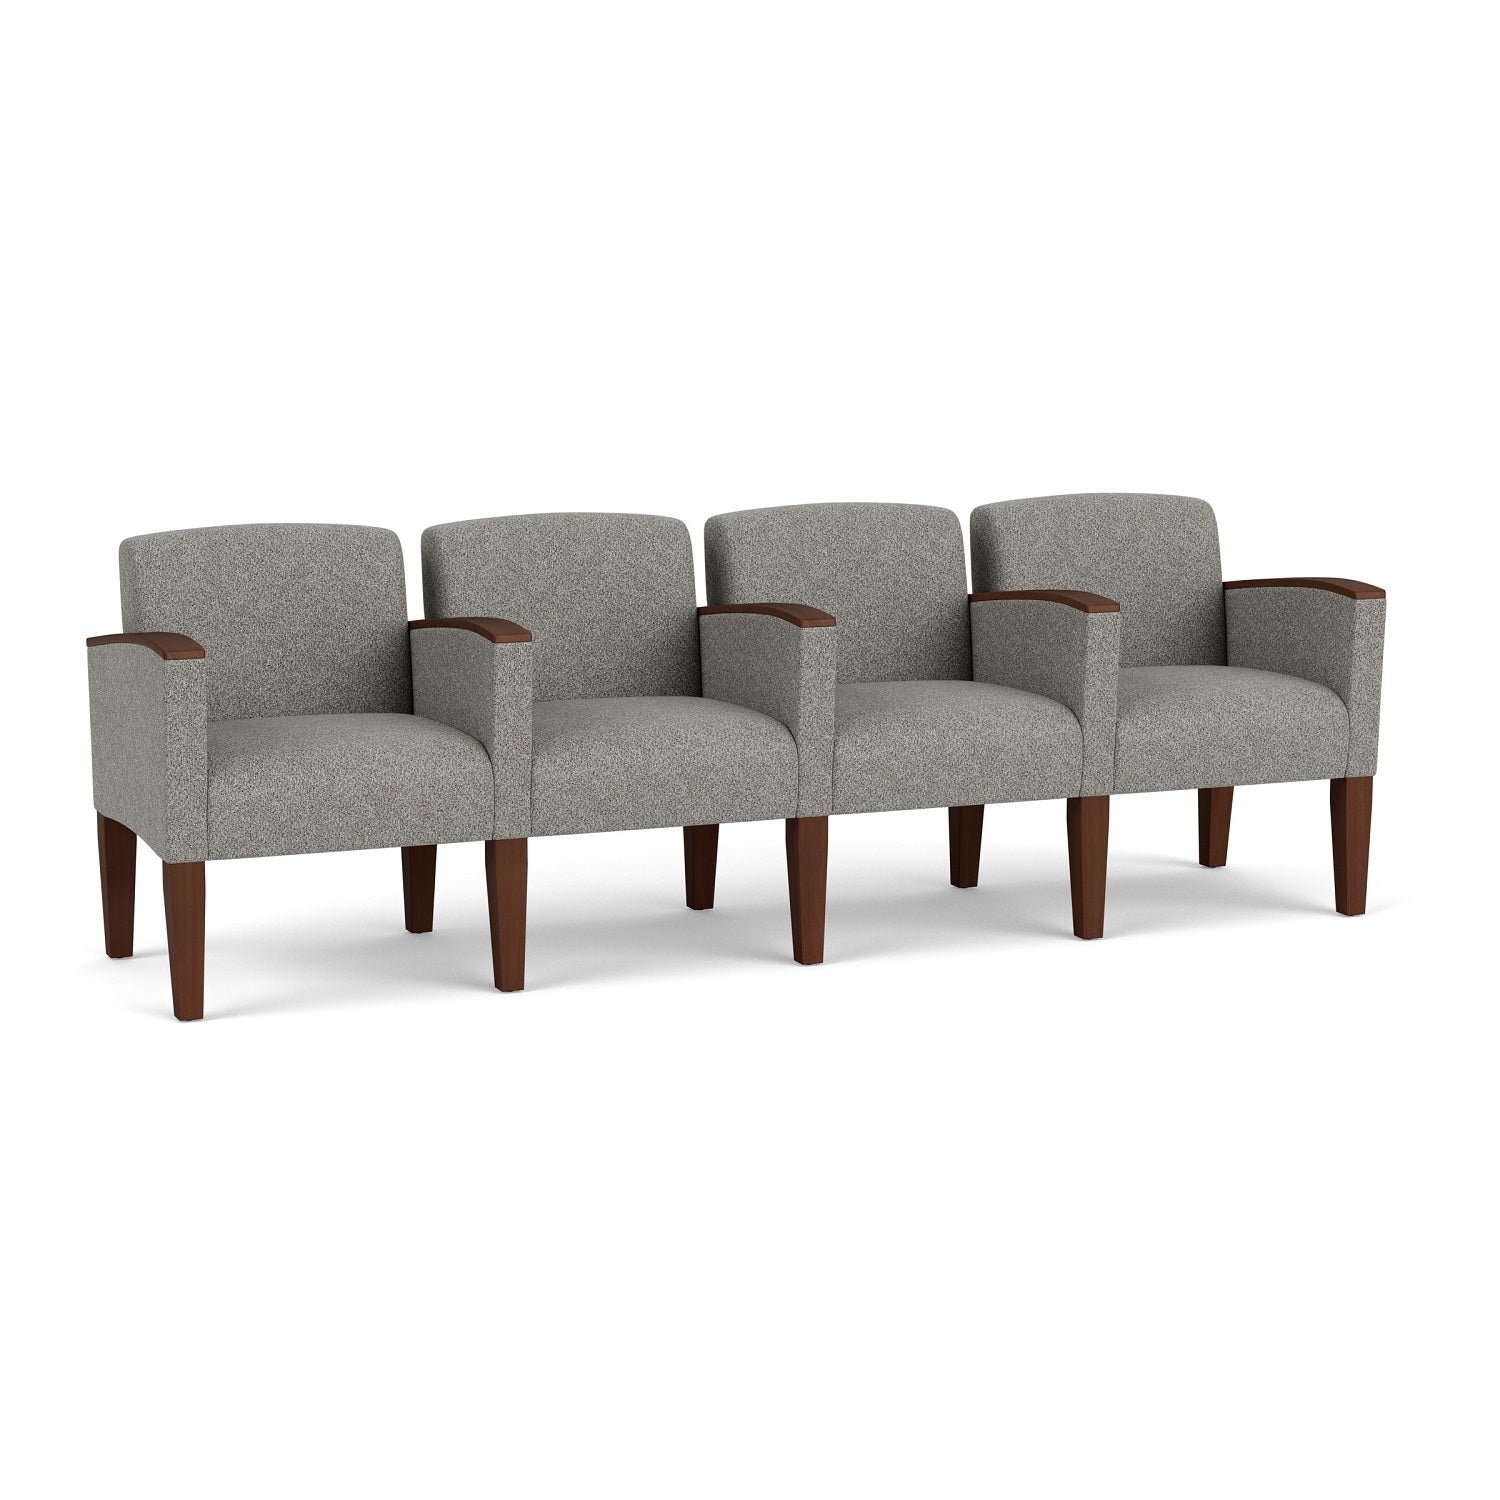 Belmont Collection Reception Seating, 4 Seats with Center Arms, Standard Fabric Upholstery, FREE SHIPPING